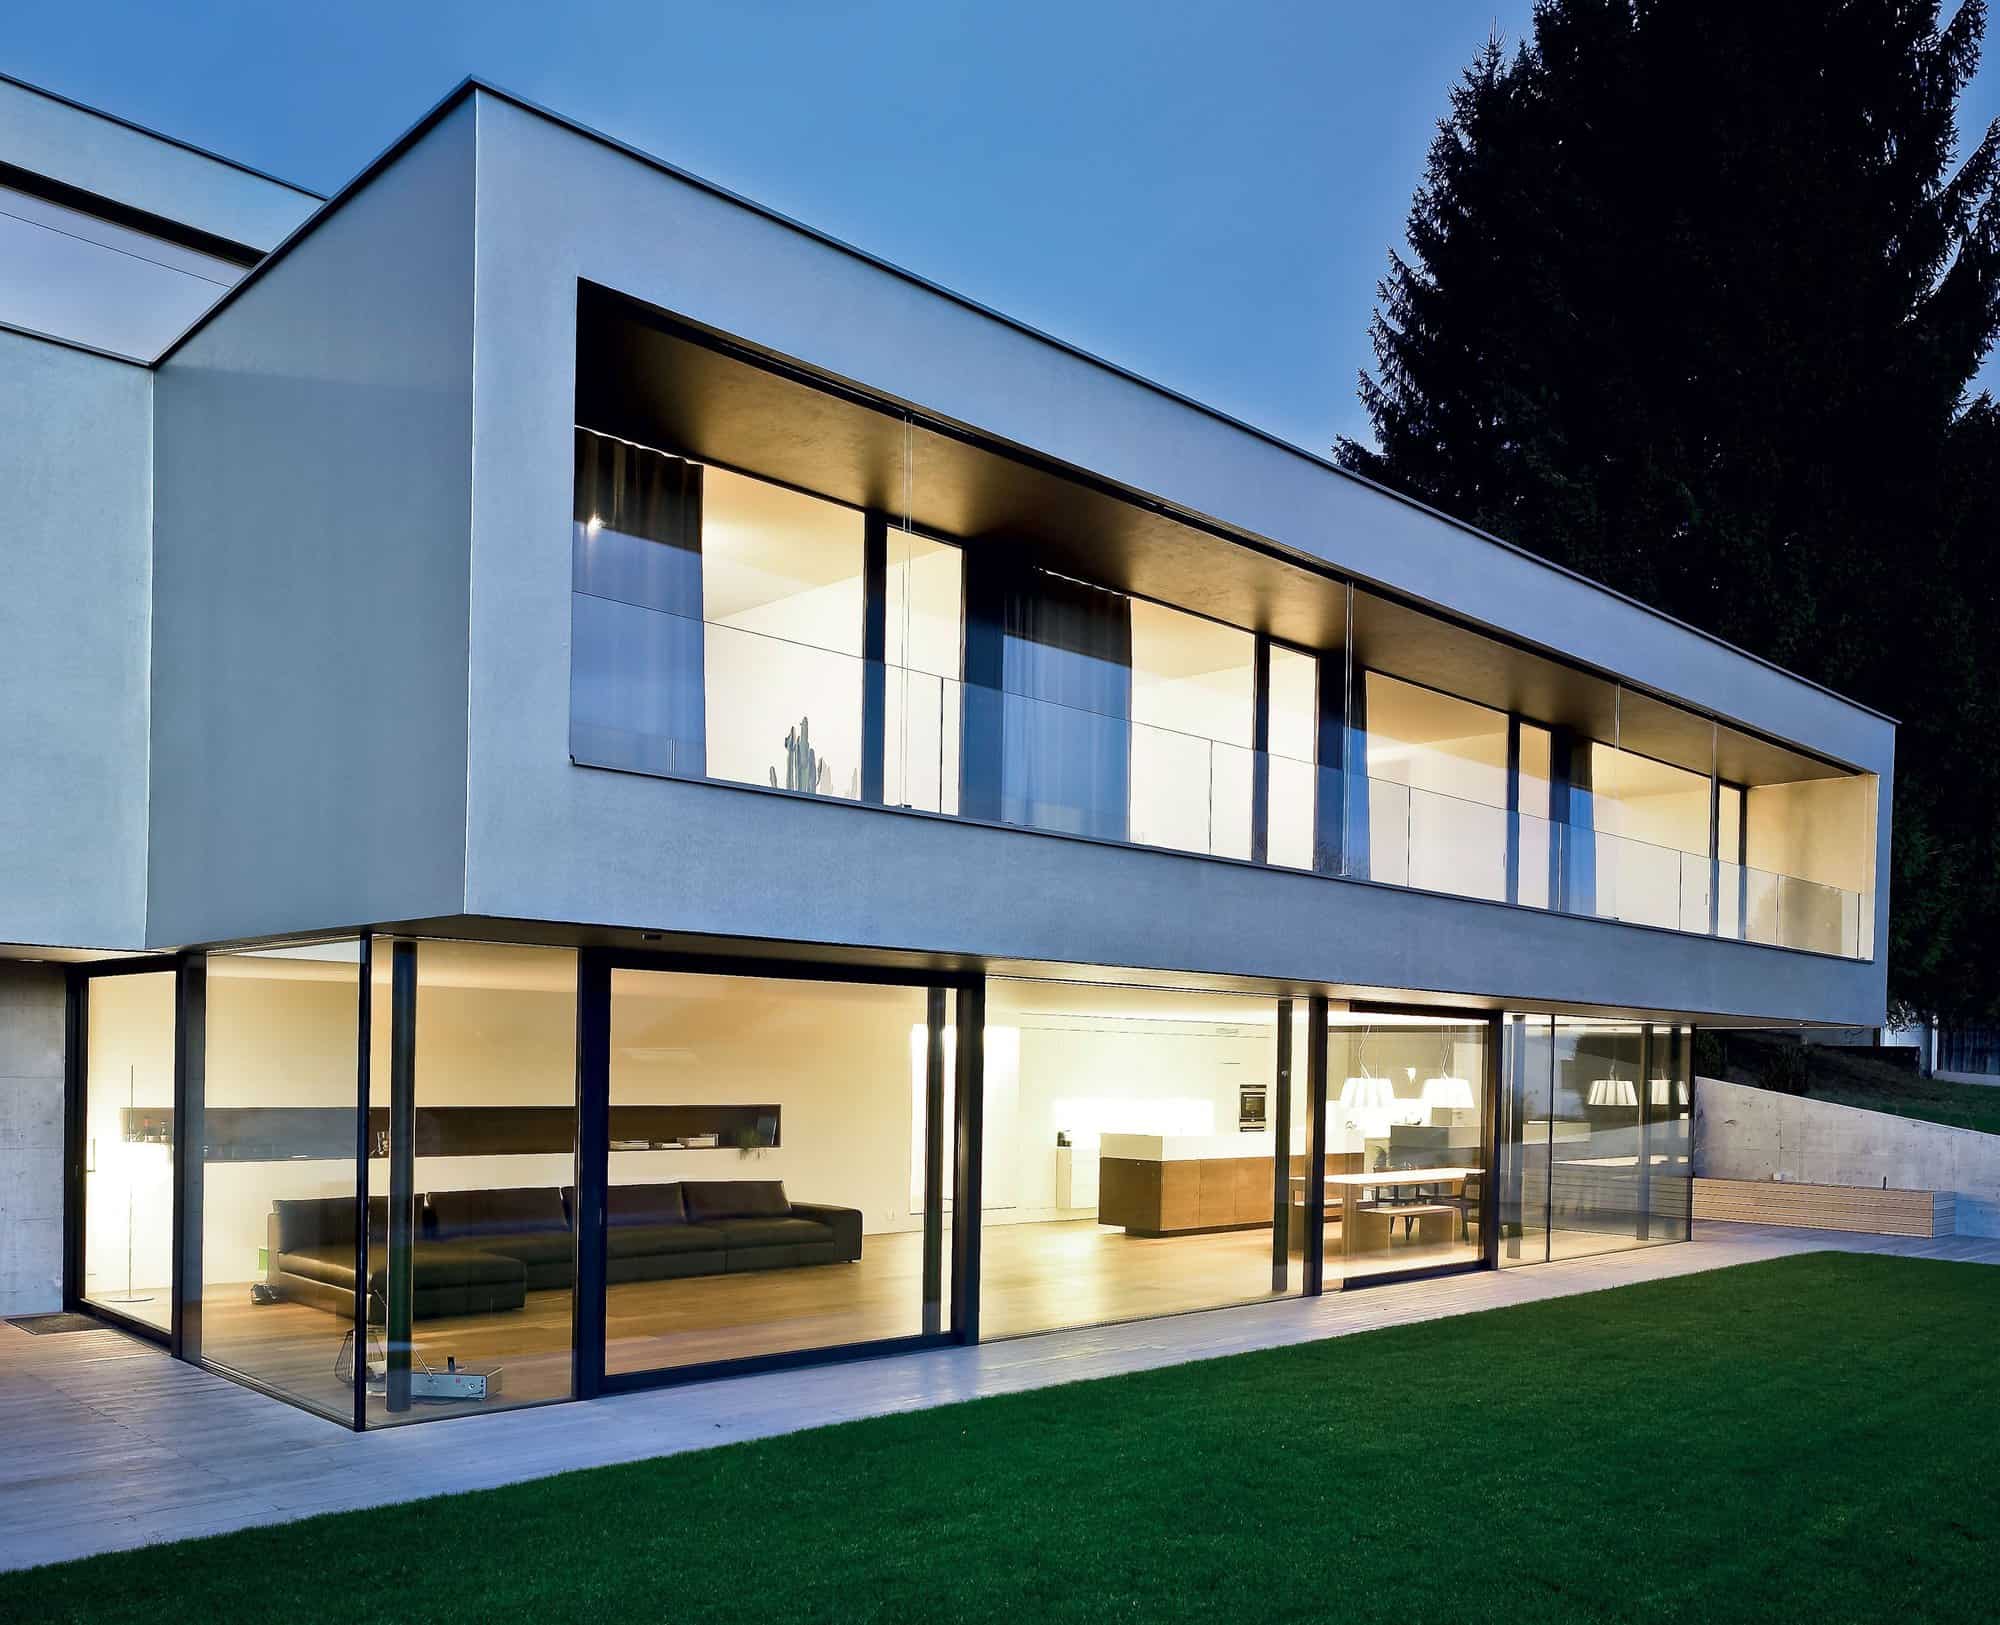 Aluminium windows with the highest possible A+ energy rating